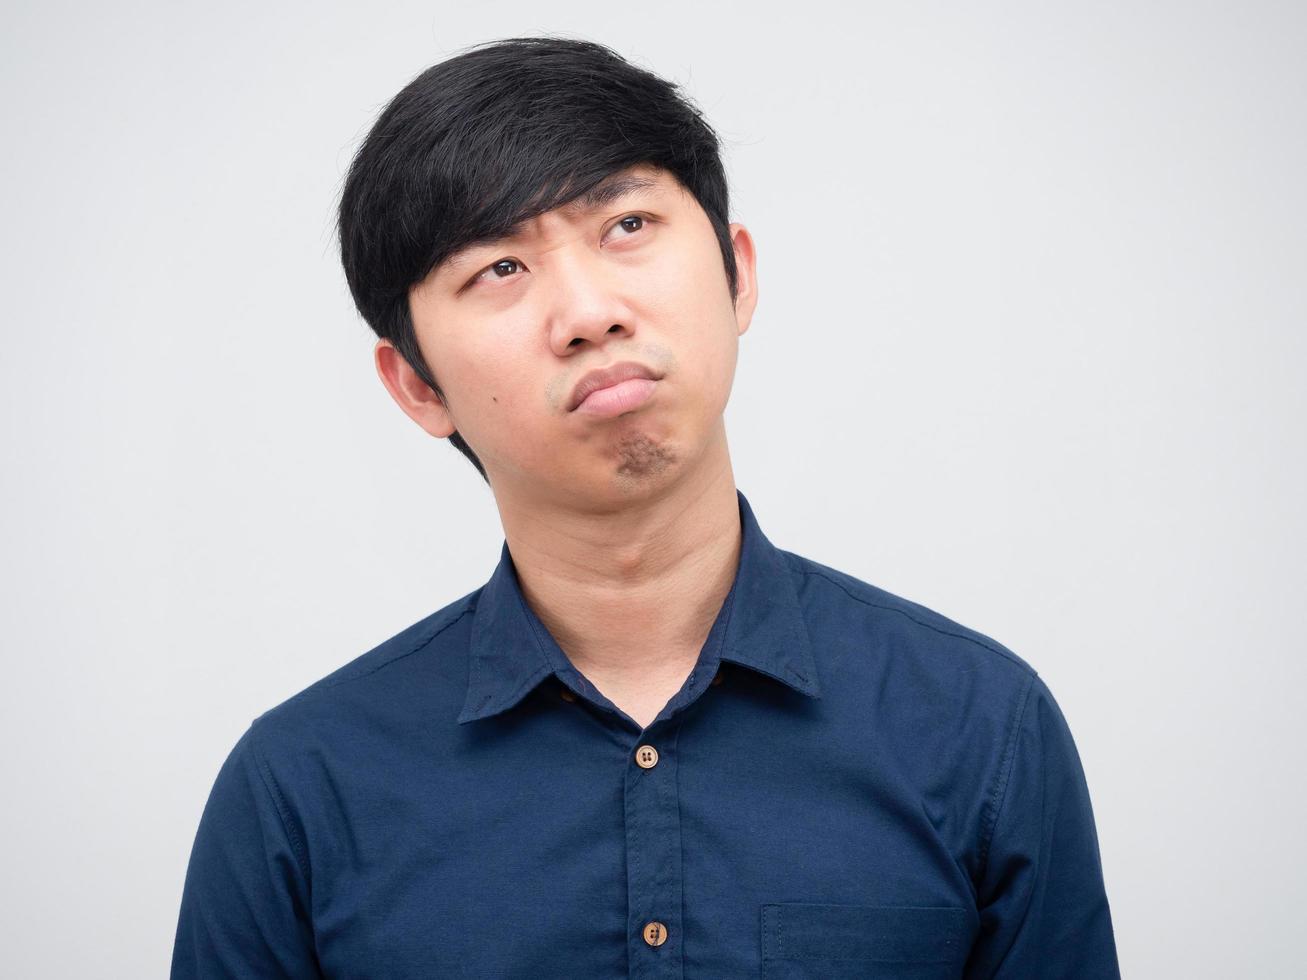 Portrait face of asian man feeling strain and worry white background photo